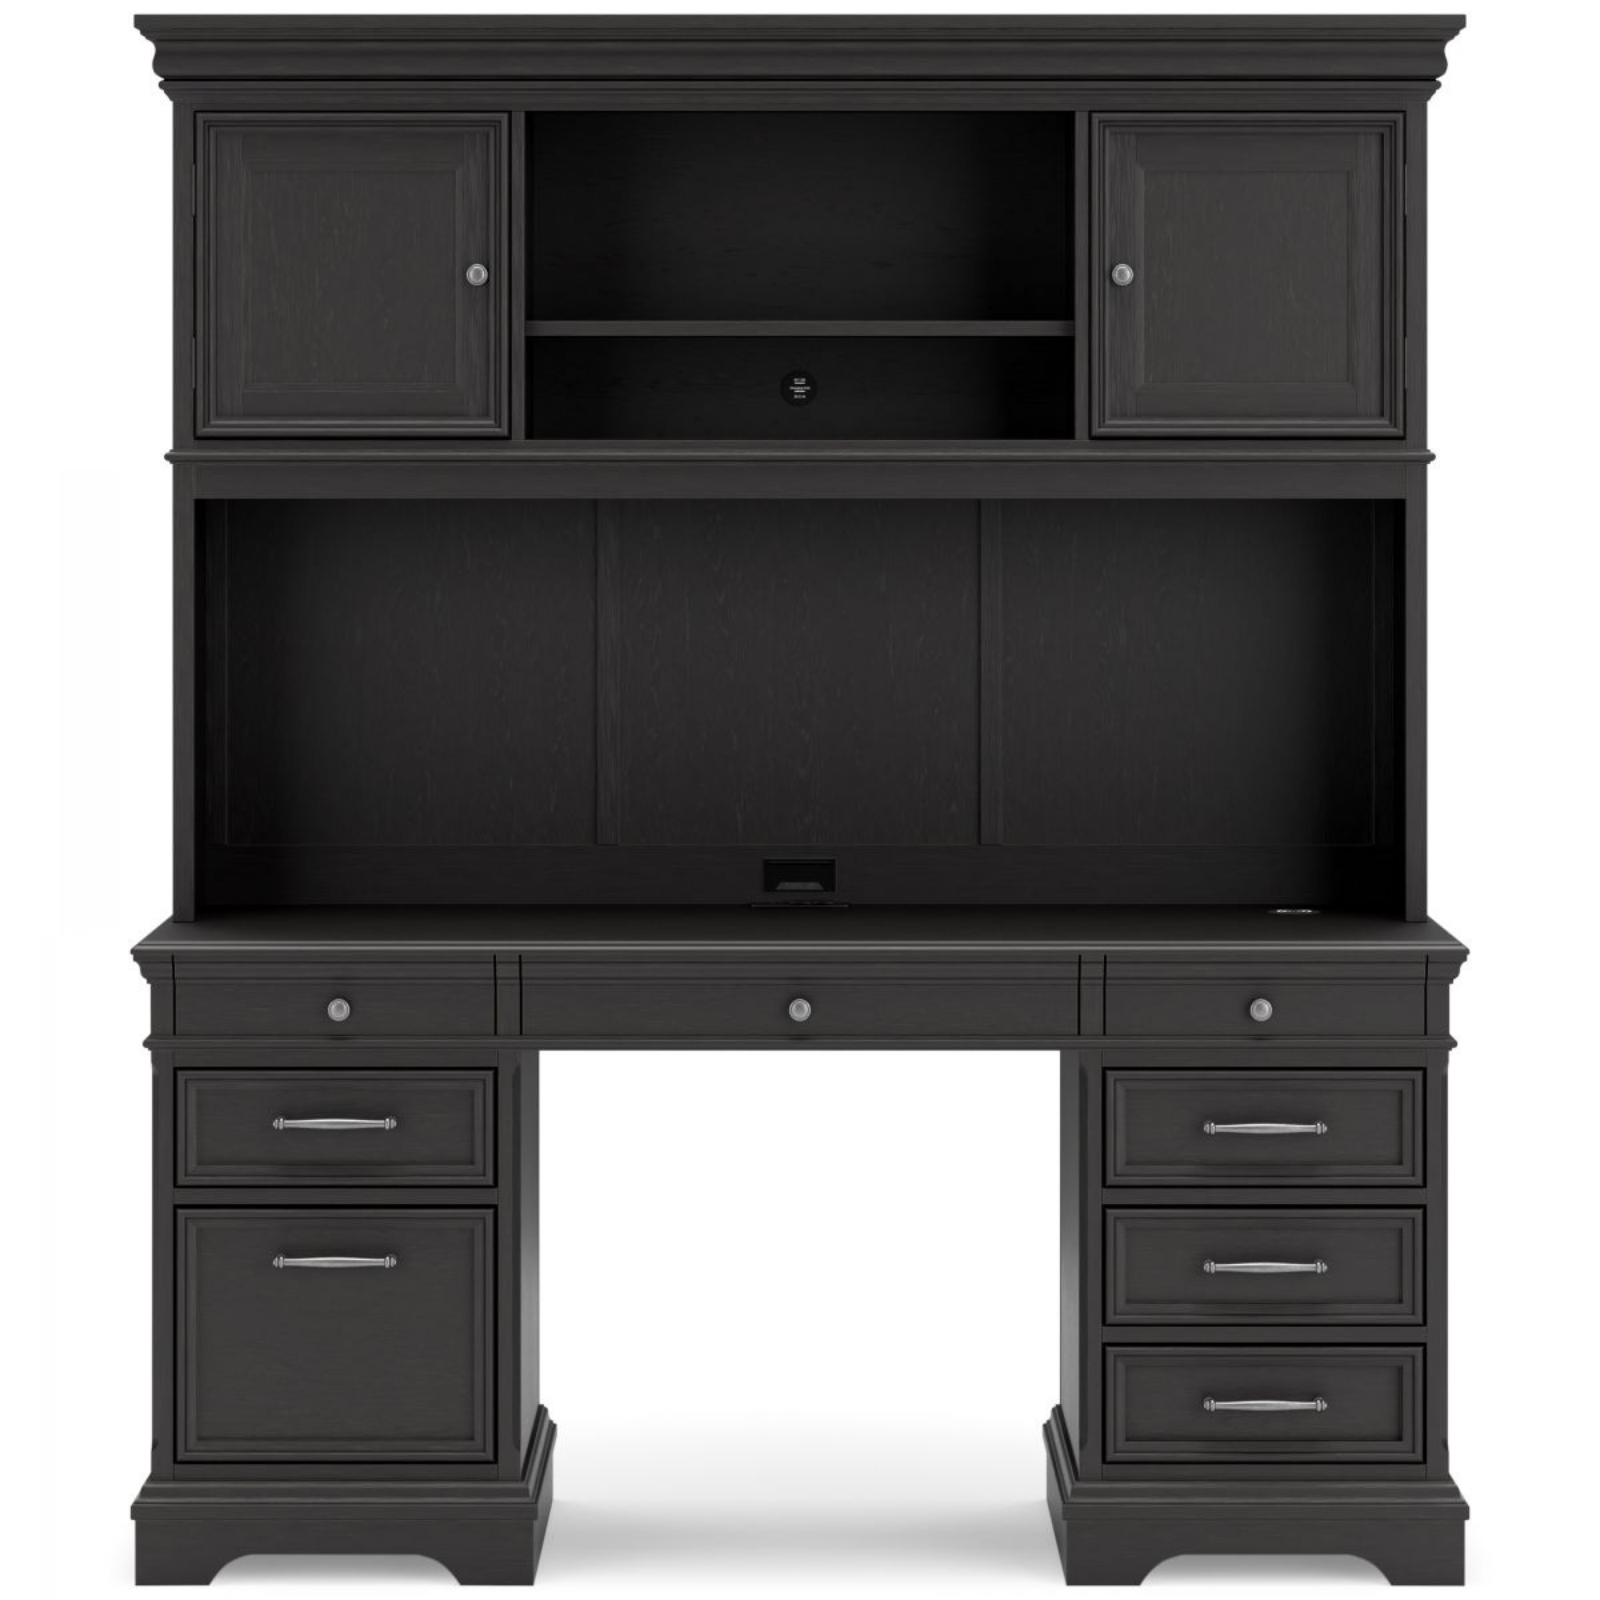 Picture of Beckincreek Credenza with Hutch